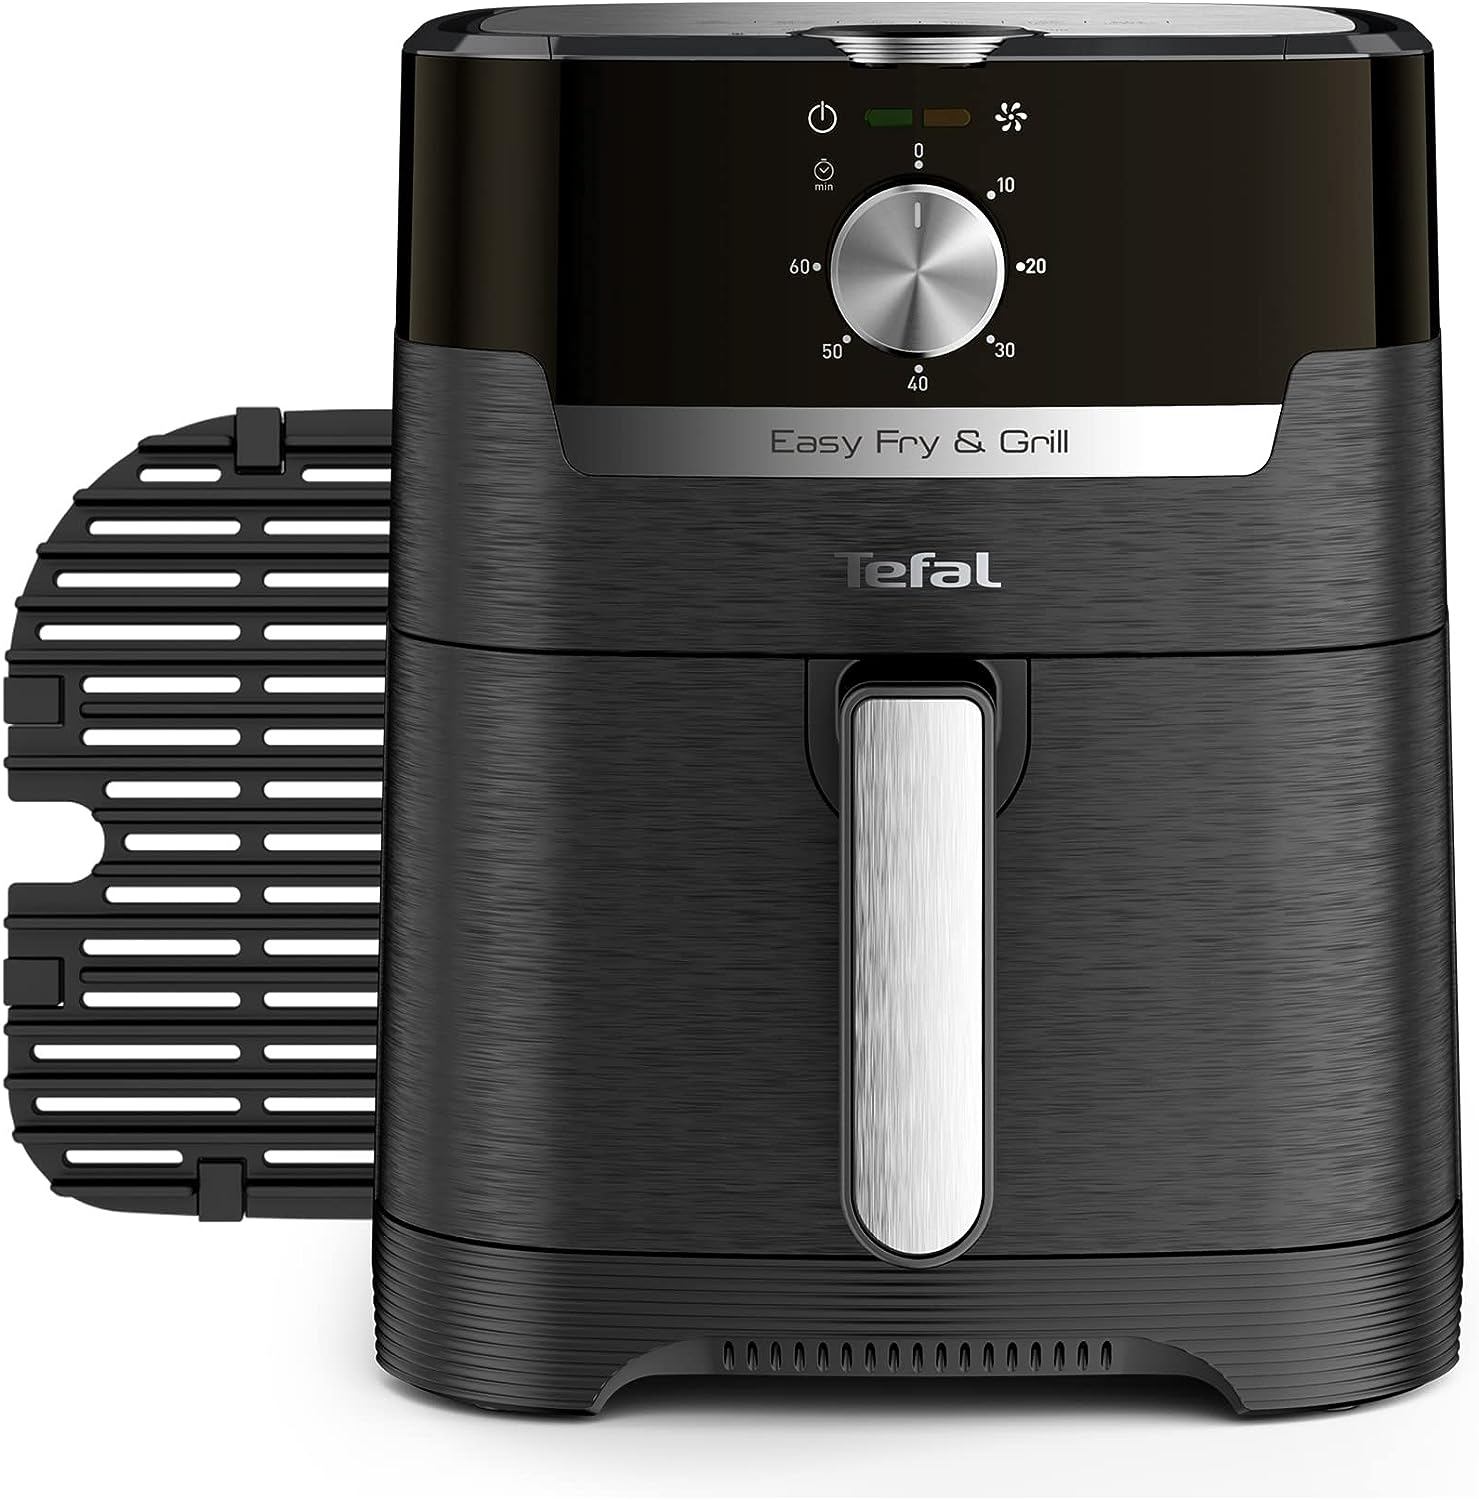 Tefal Easy Fry Classic 2in1 Air Fryer and Grill